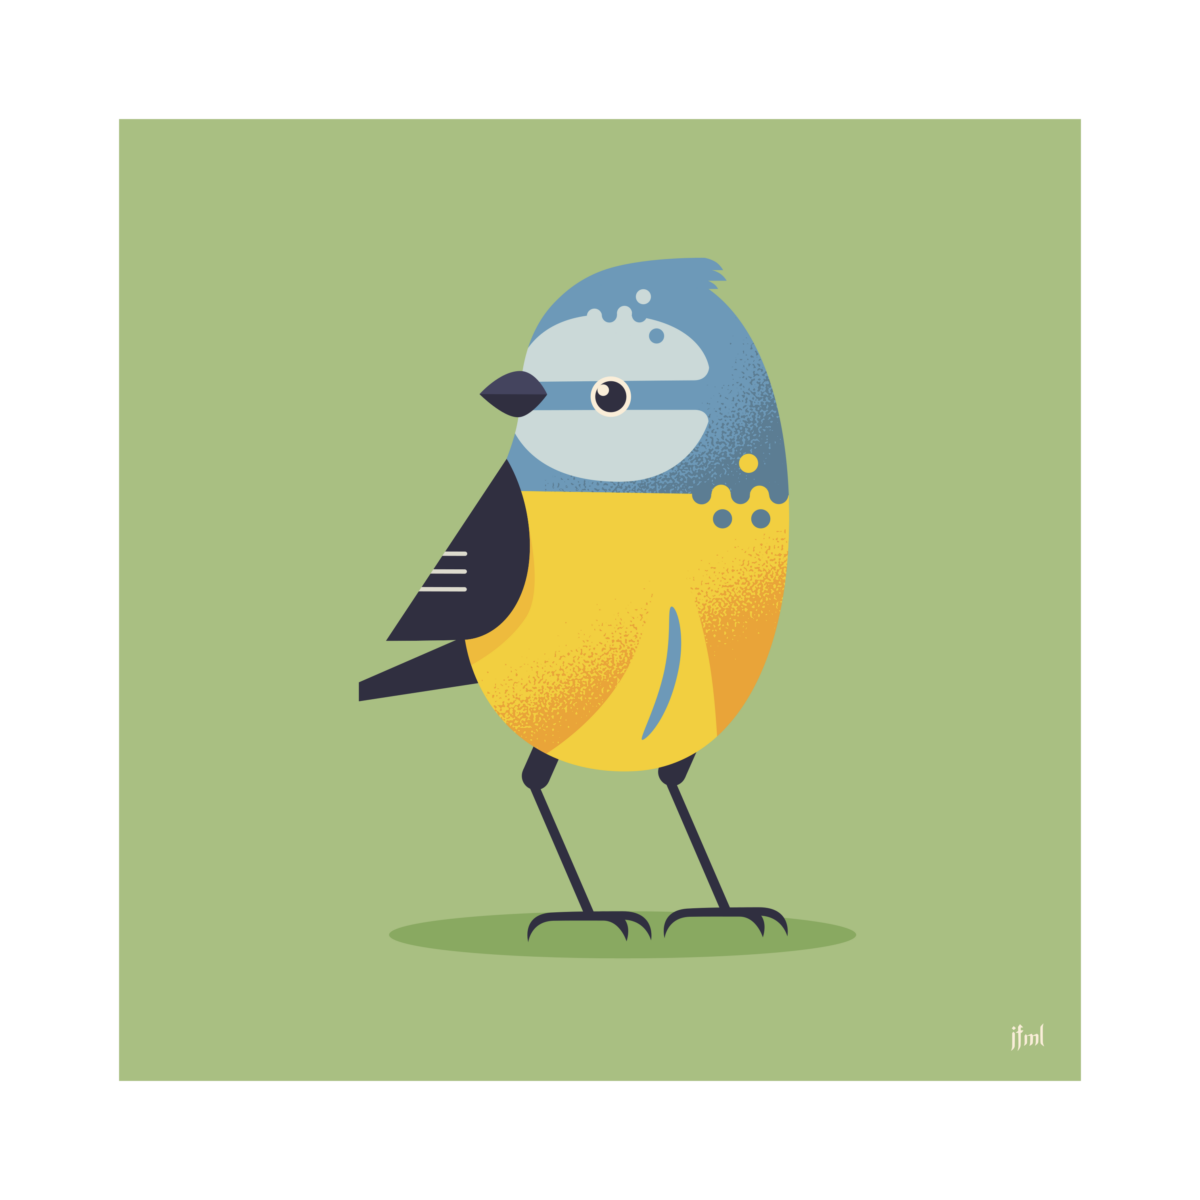 Another abstract vector illustration, this one of a blue tit on a light green background